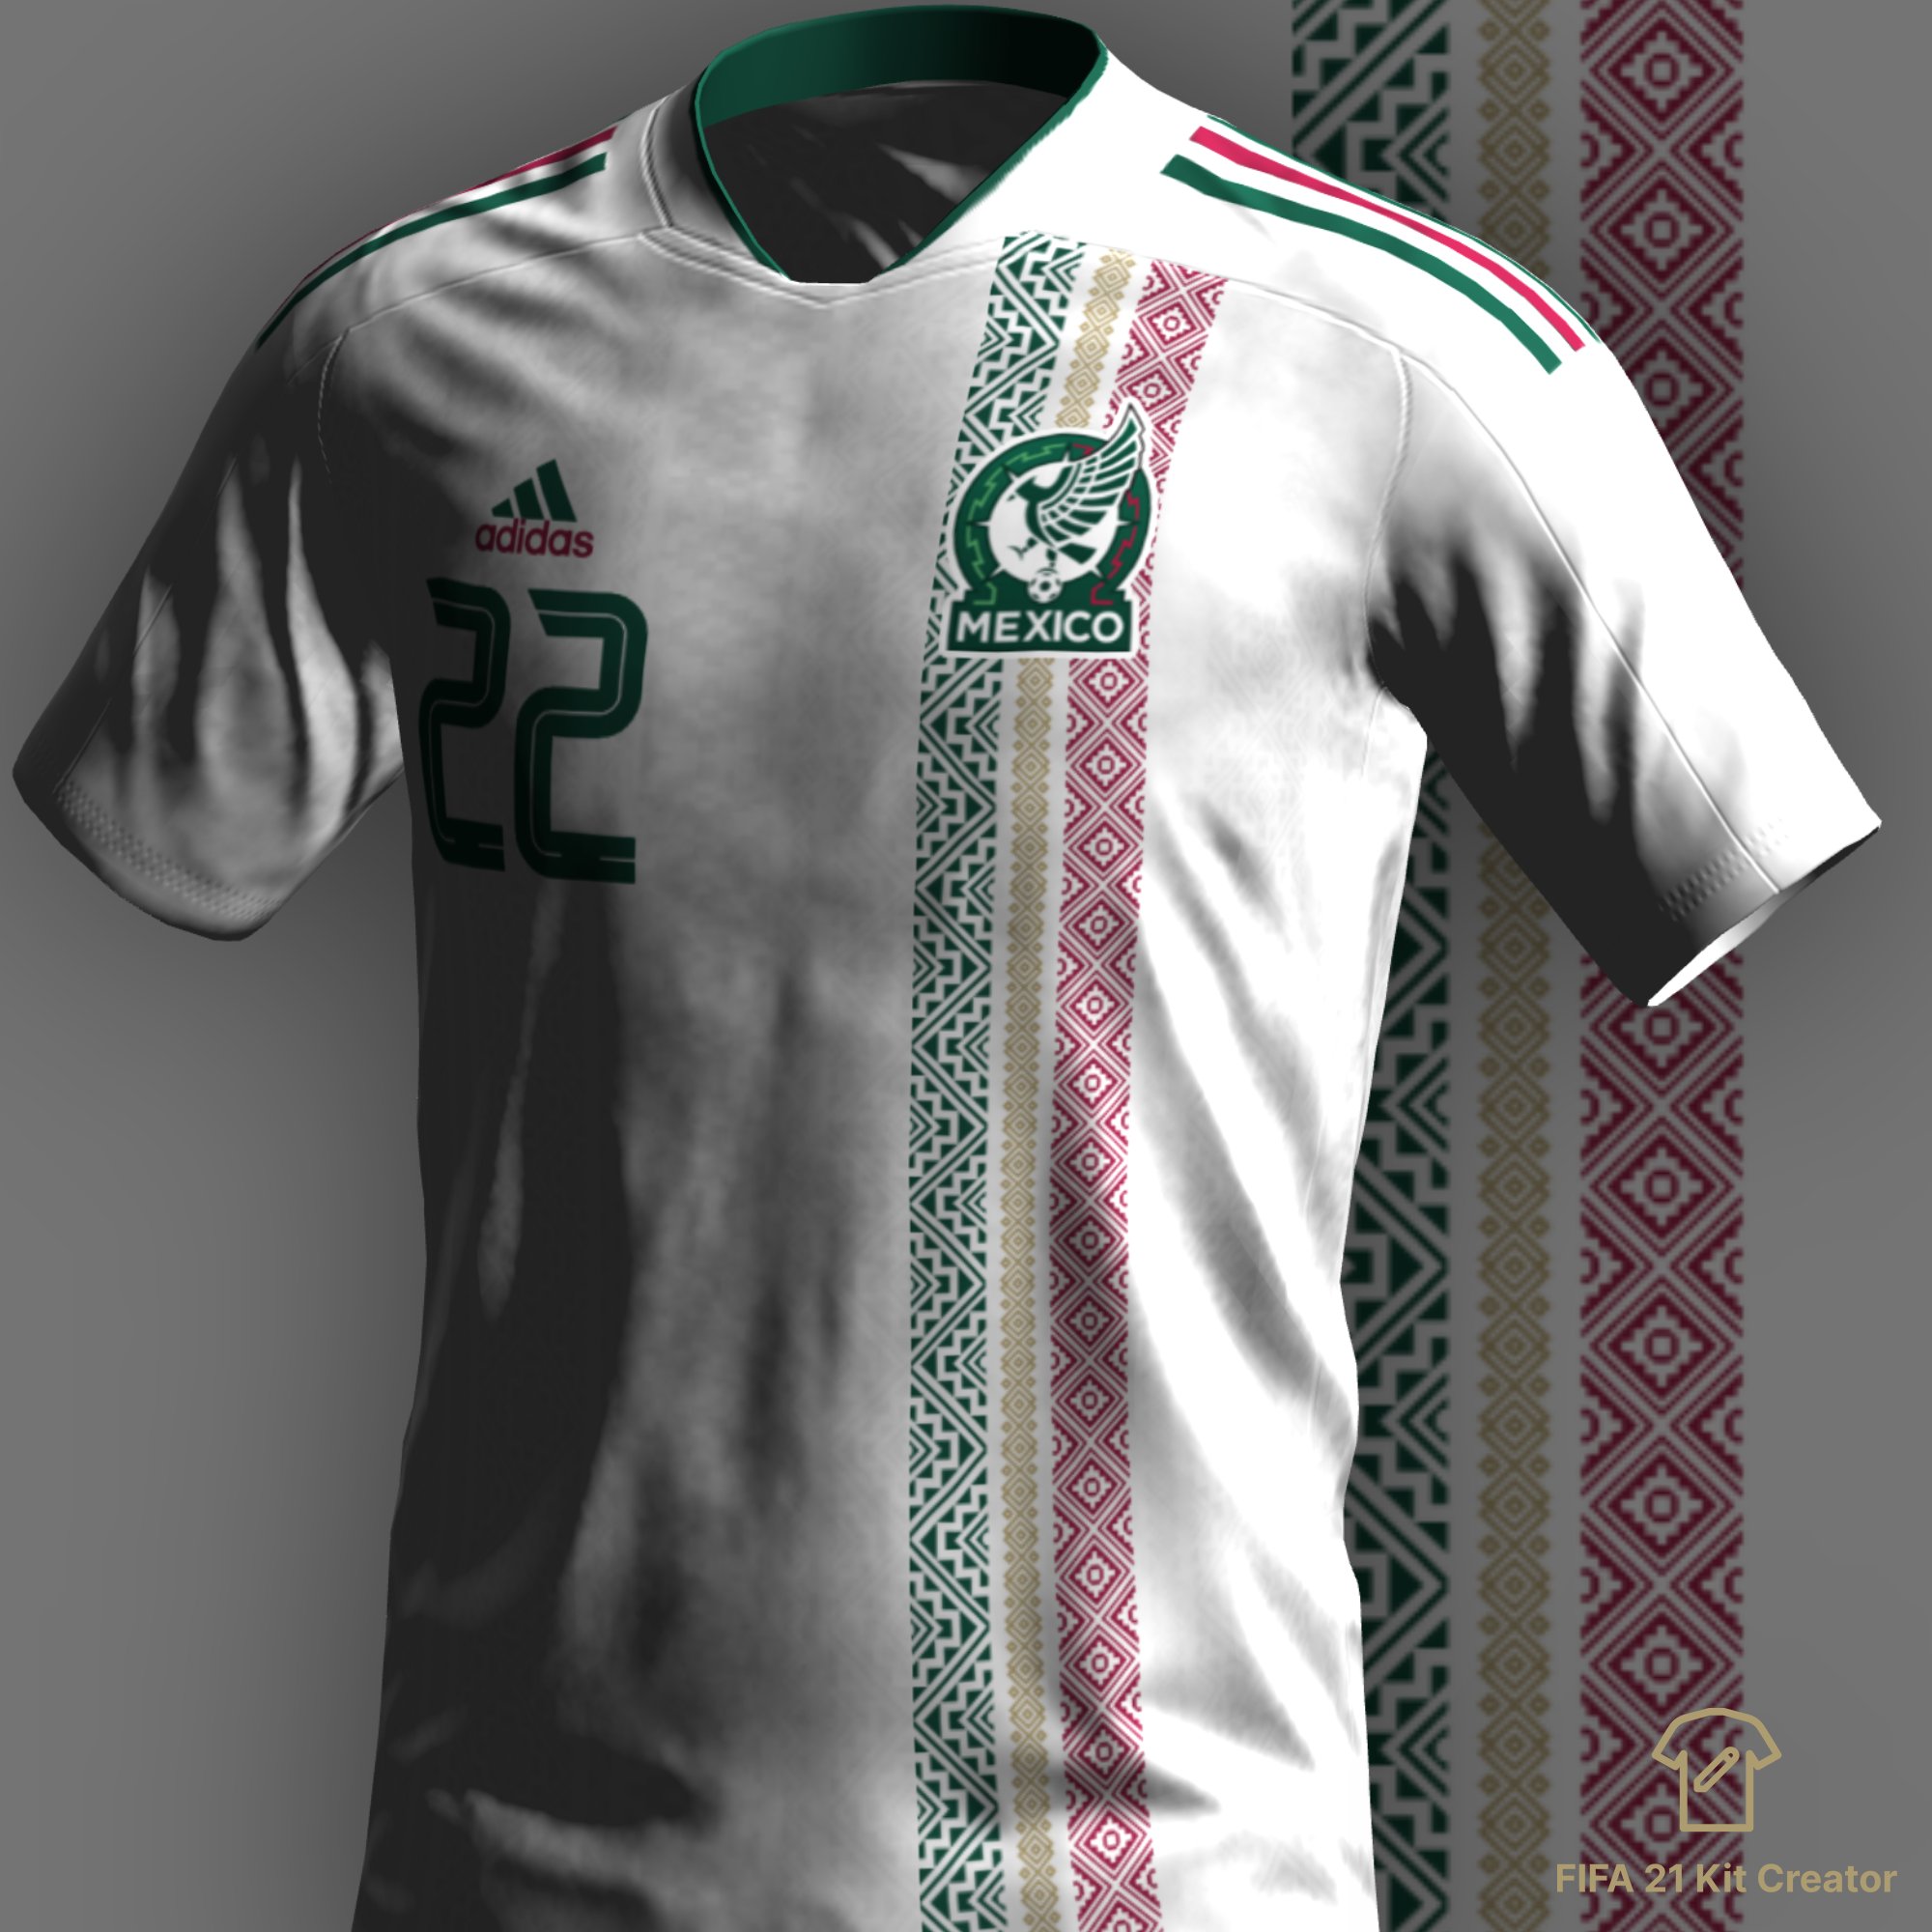 lfcunion kits on Twitter "Mexico away concept 🇲🇽 Made with